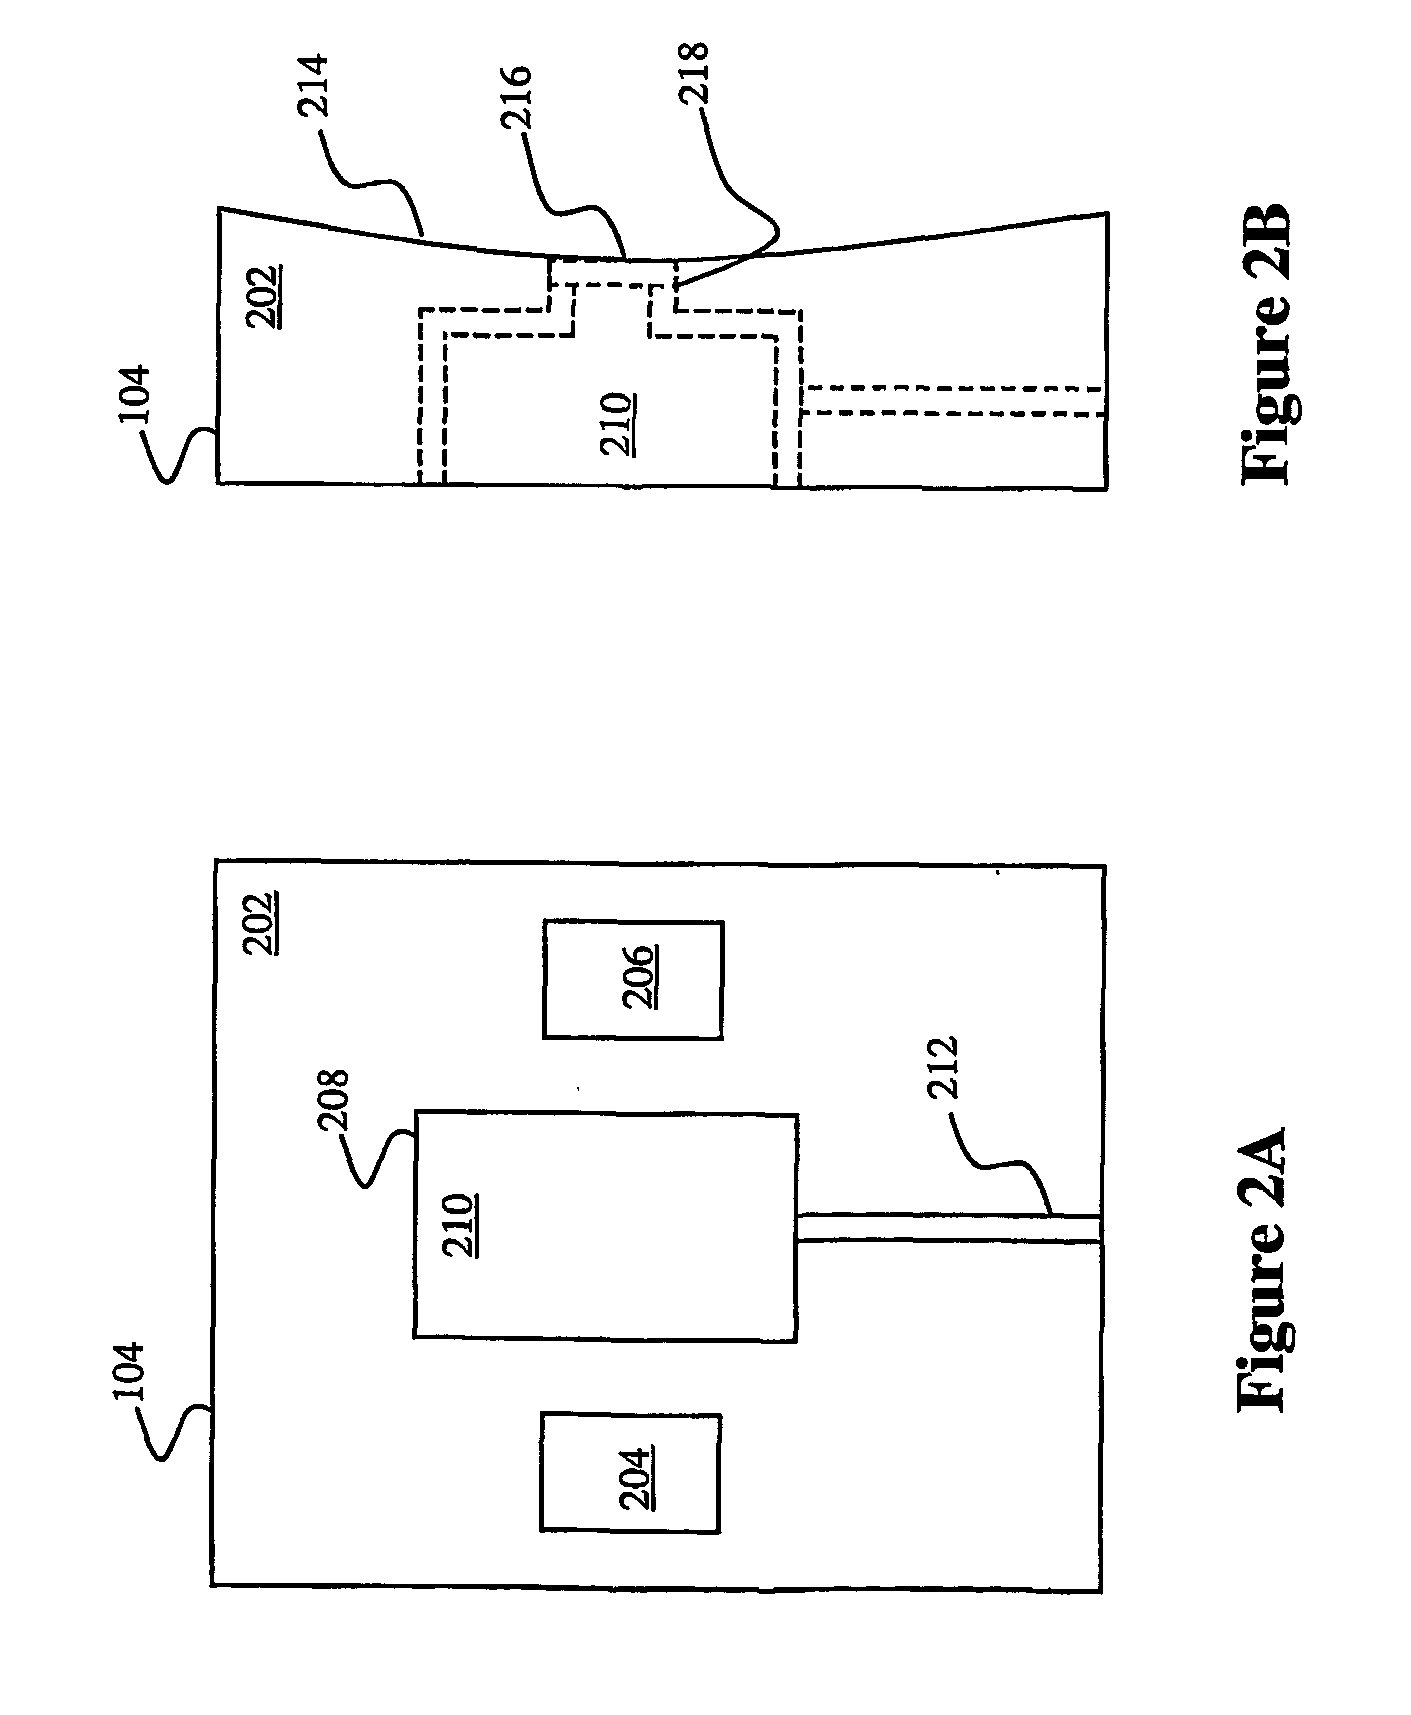 Method and apparatus for reading and controlling electric power consumption